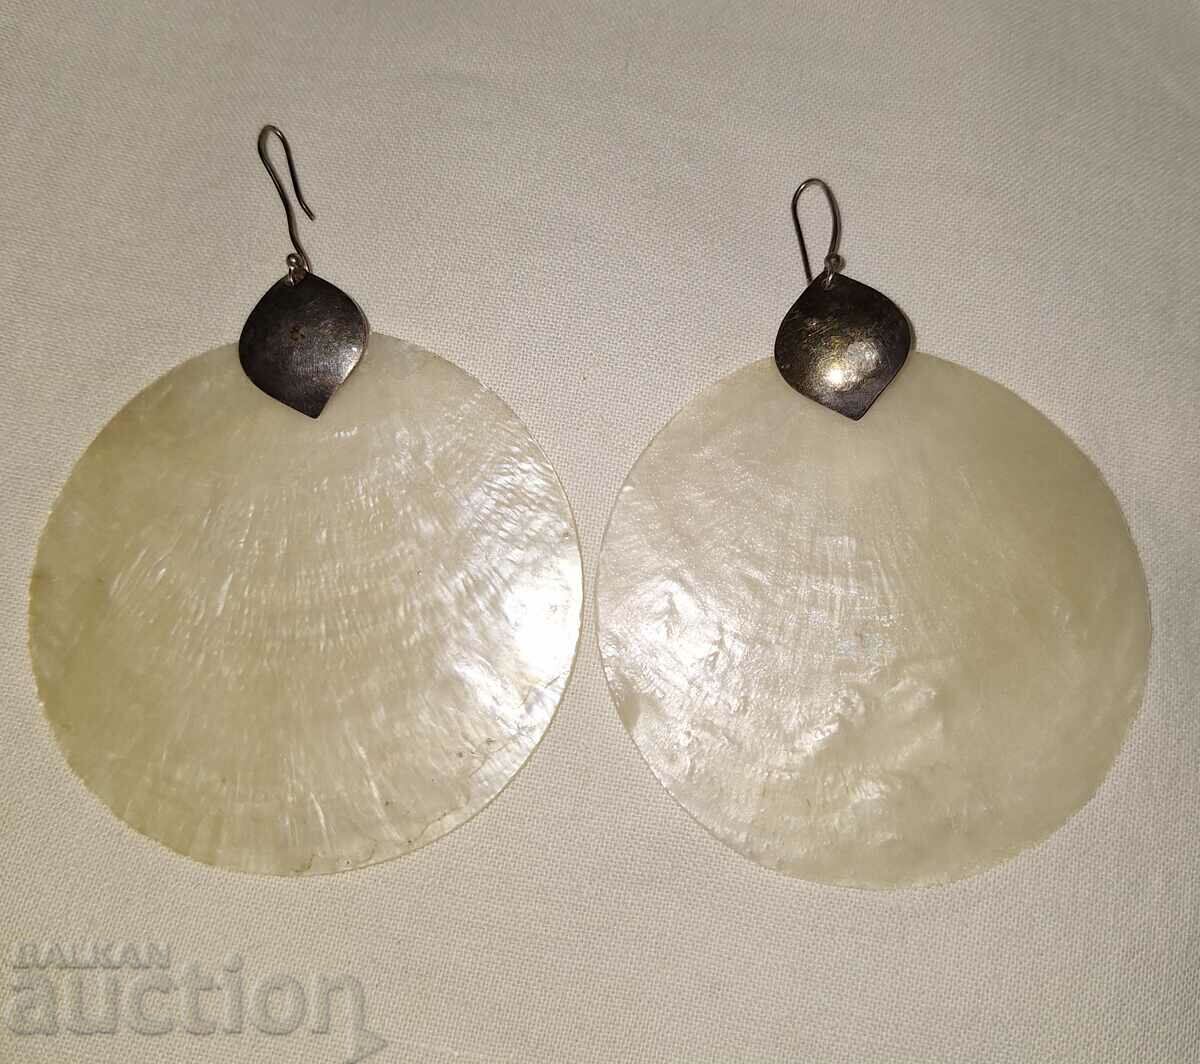 Large vintage art silver and pearl shell earrings